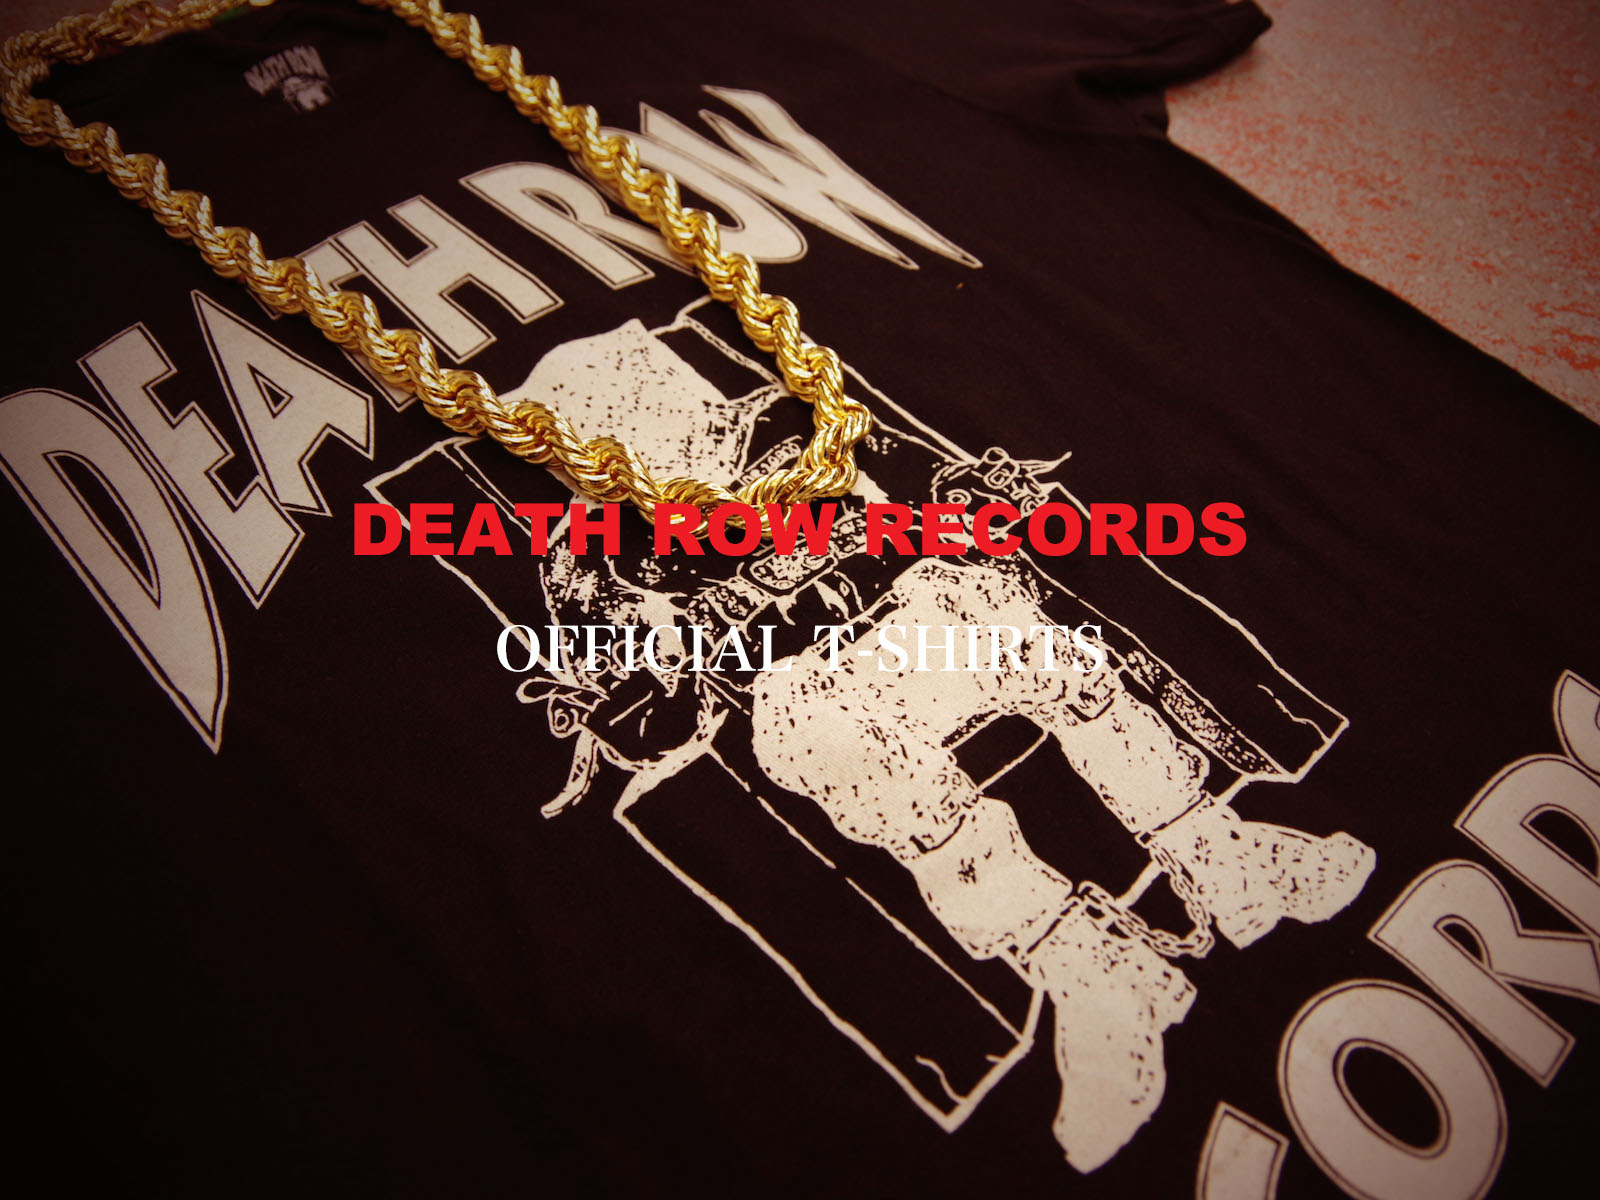 DEATH ROW RECORDS OFFICAL T-SHIRTS